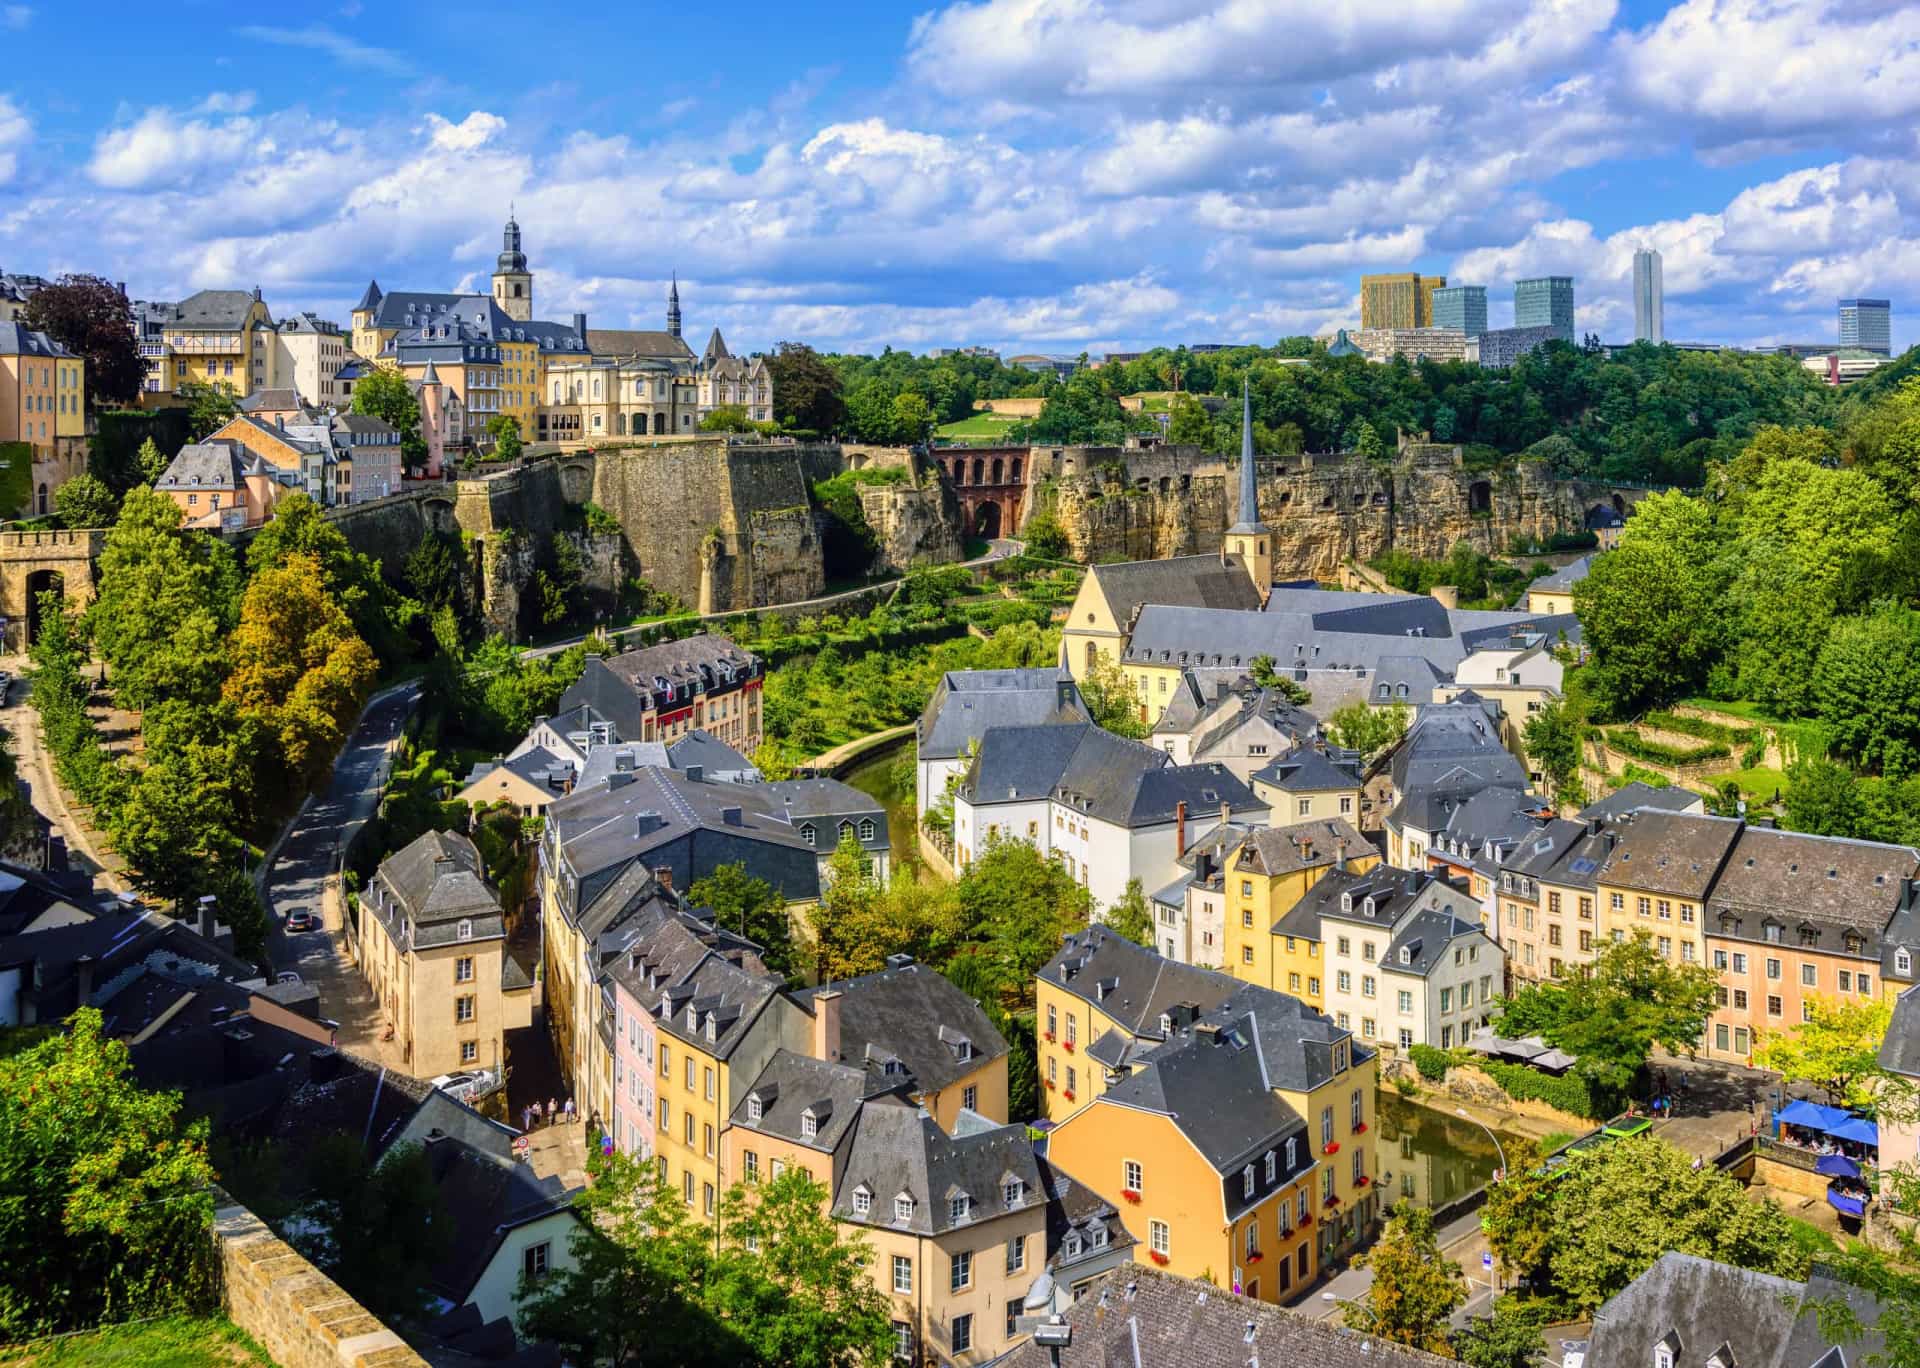 <p>The Grand Duchy of Luxembourg is one of Europe's most picturesque countries, a fact exemplified by its beautiful and historic capital, Luxembourg City. And what better way to start discovering this diminutive landlocked nation than by exploring the city's charming Old Quarter—a <a href="https://www.starsinsider.com/travel/386186/world-heritage-sites-that-could-disappear-anytime" rel="noopener">UNESCO</a> World Heritage Site.</p>